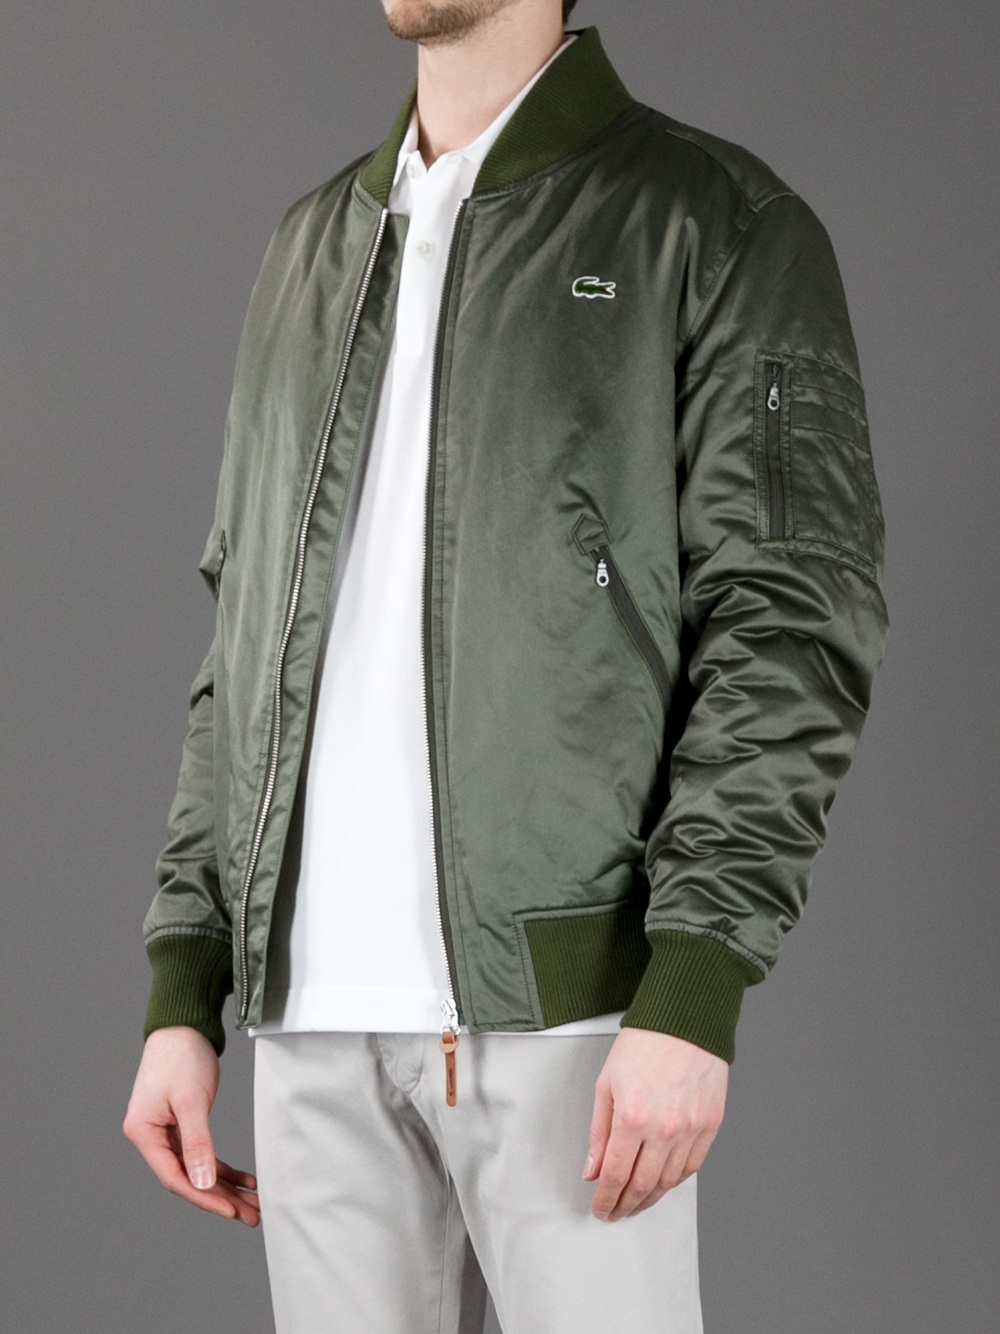 Lyst - Lacoste L!Ive Classic Bomber Jacket in Green for Men